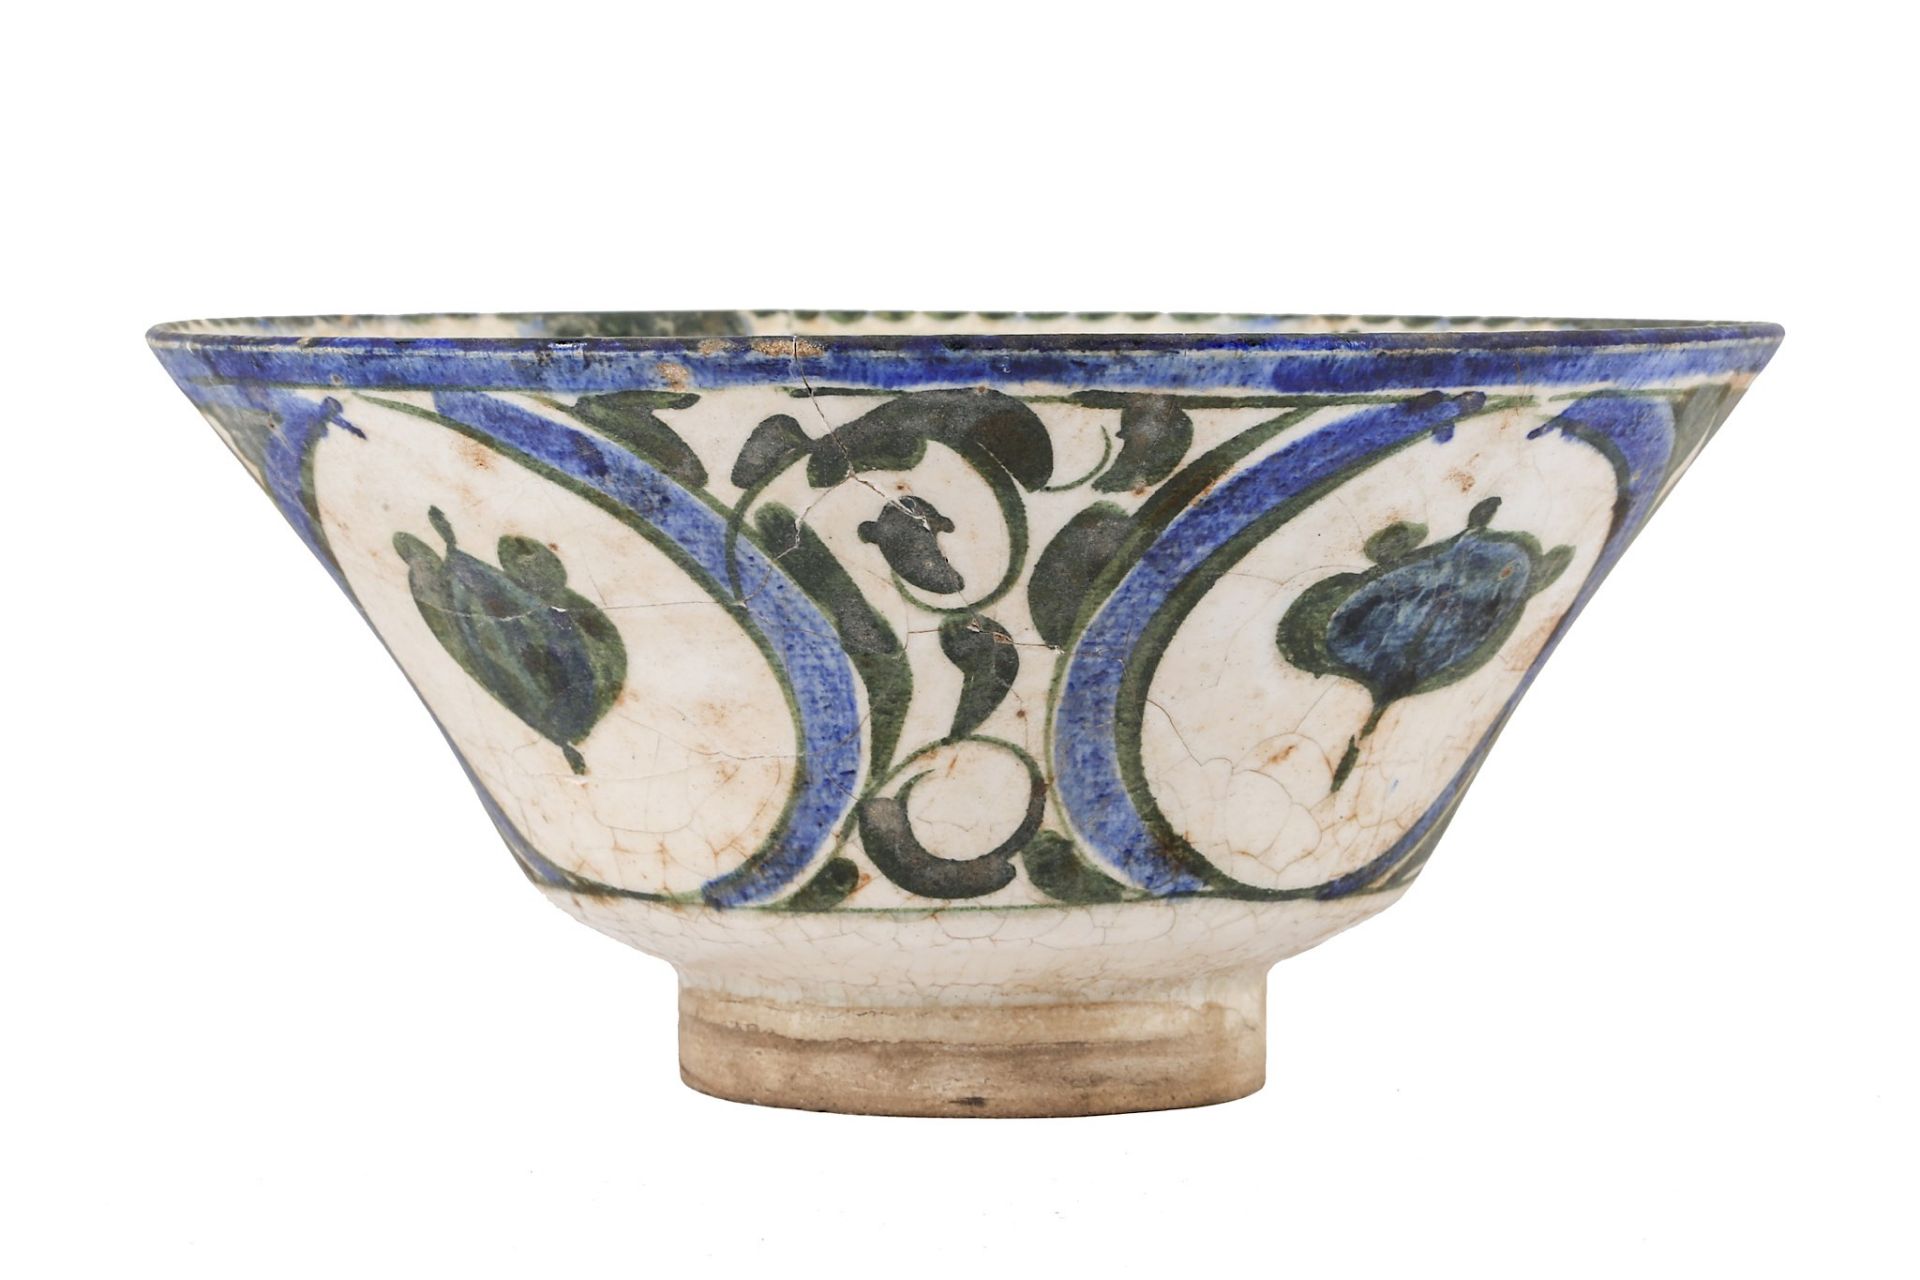 A POTTERY BOWL WITH COBALT BLUE STRIPES AND CALLIGRAPHIC BANDS Kashan, Iran, 13th century  Of - Image 4 of 4